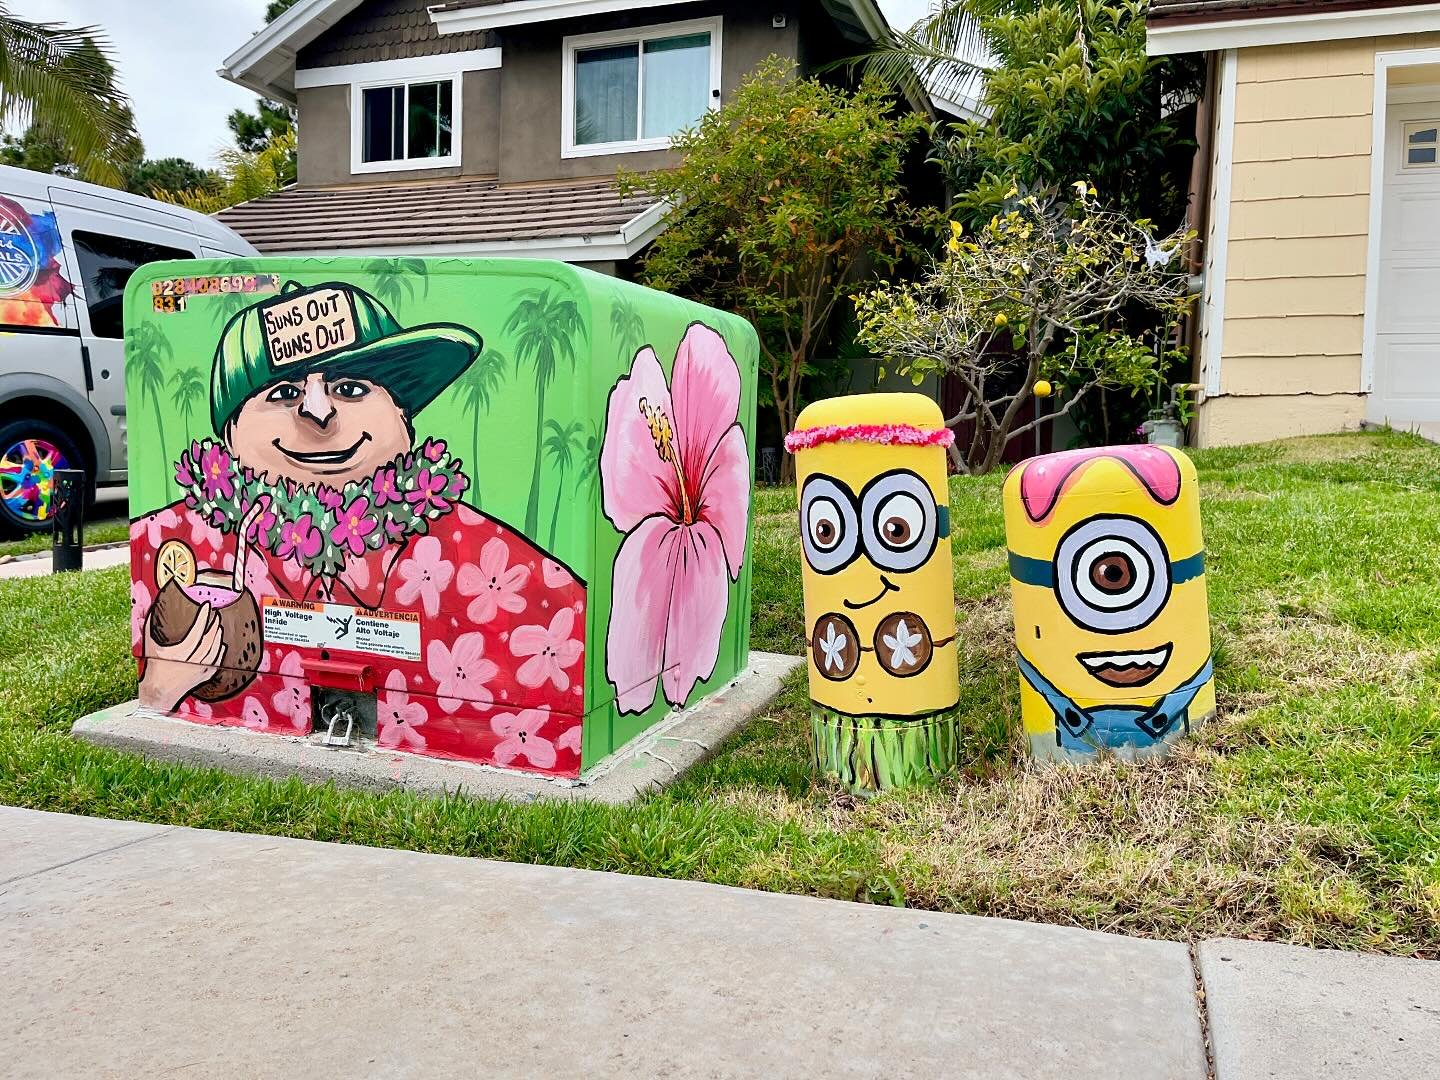 I finally got around to painting my utility boxes for summer and they&rsquo;re cracking me up so much! They&rsquo;re in my front yard and I&rsquo;ve painted them 4 times so far this year. 

The coconut bra is everything. 

I tried to take off Gru&rsq